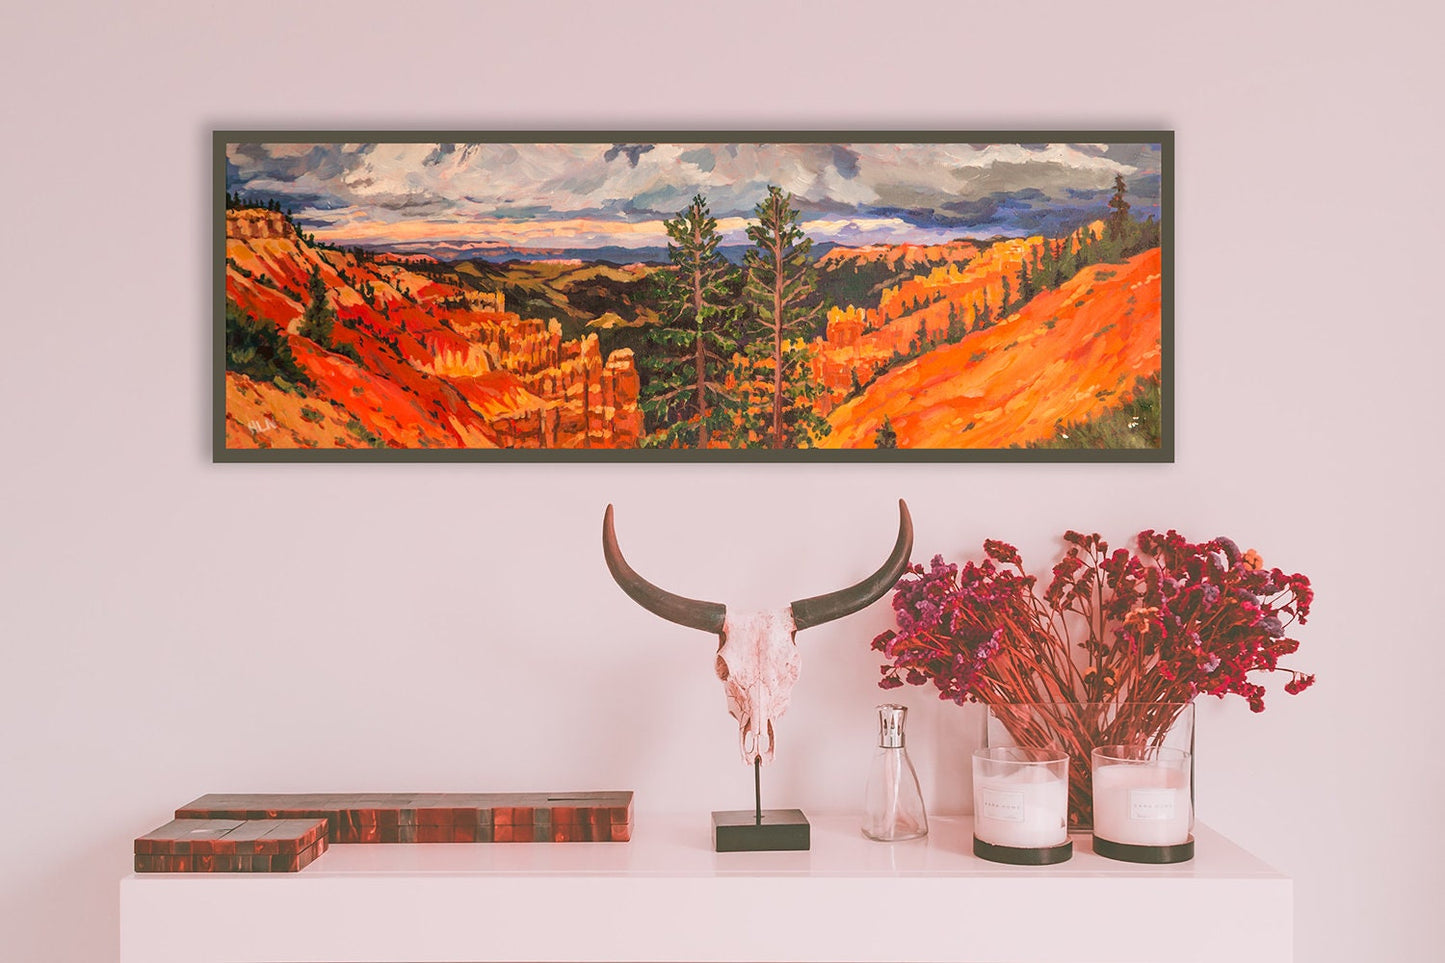 Bryce Canyon National Park painting on wall behind table with miscellaneous items